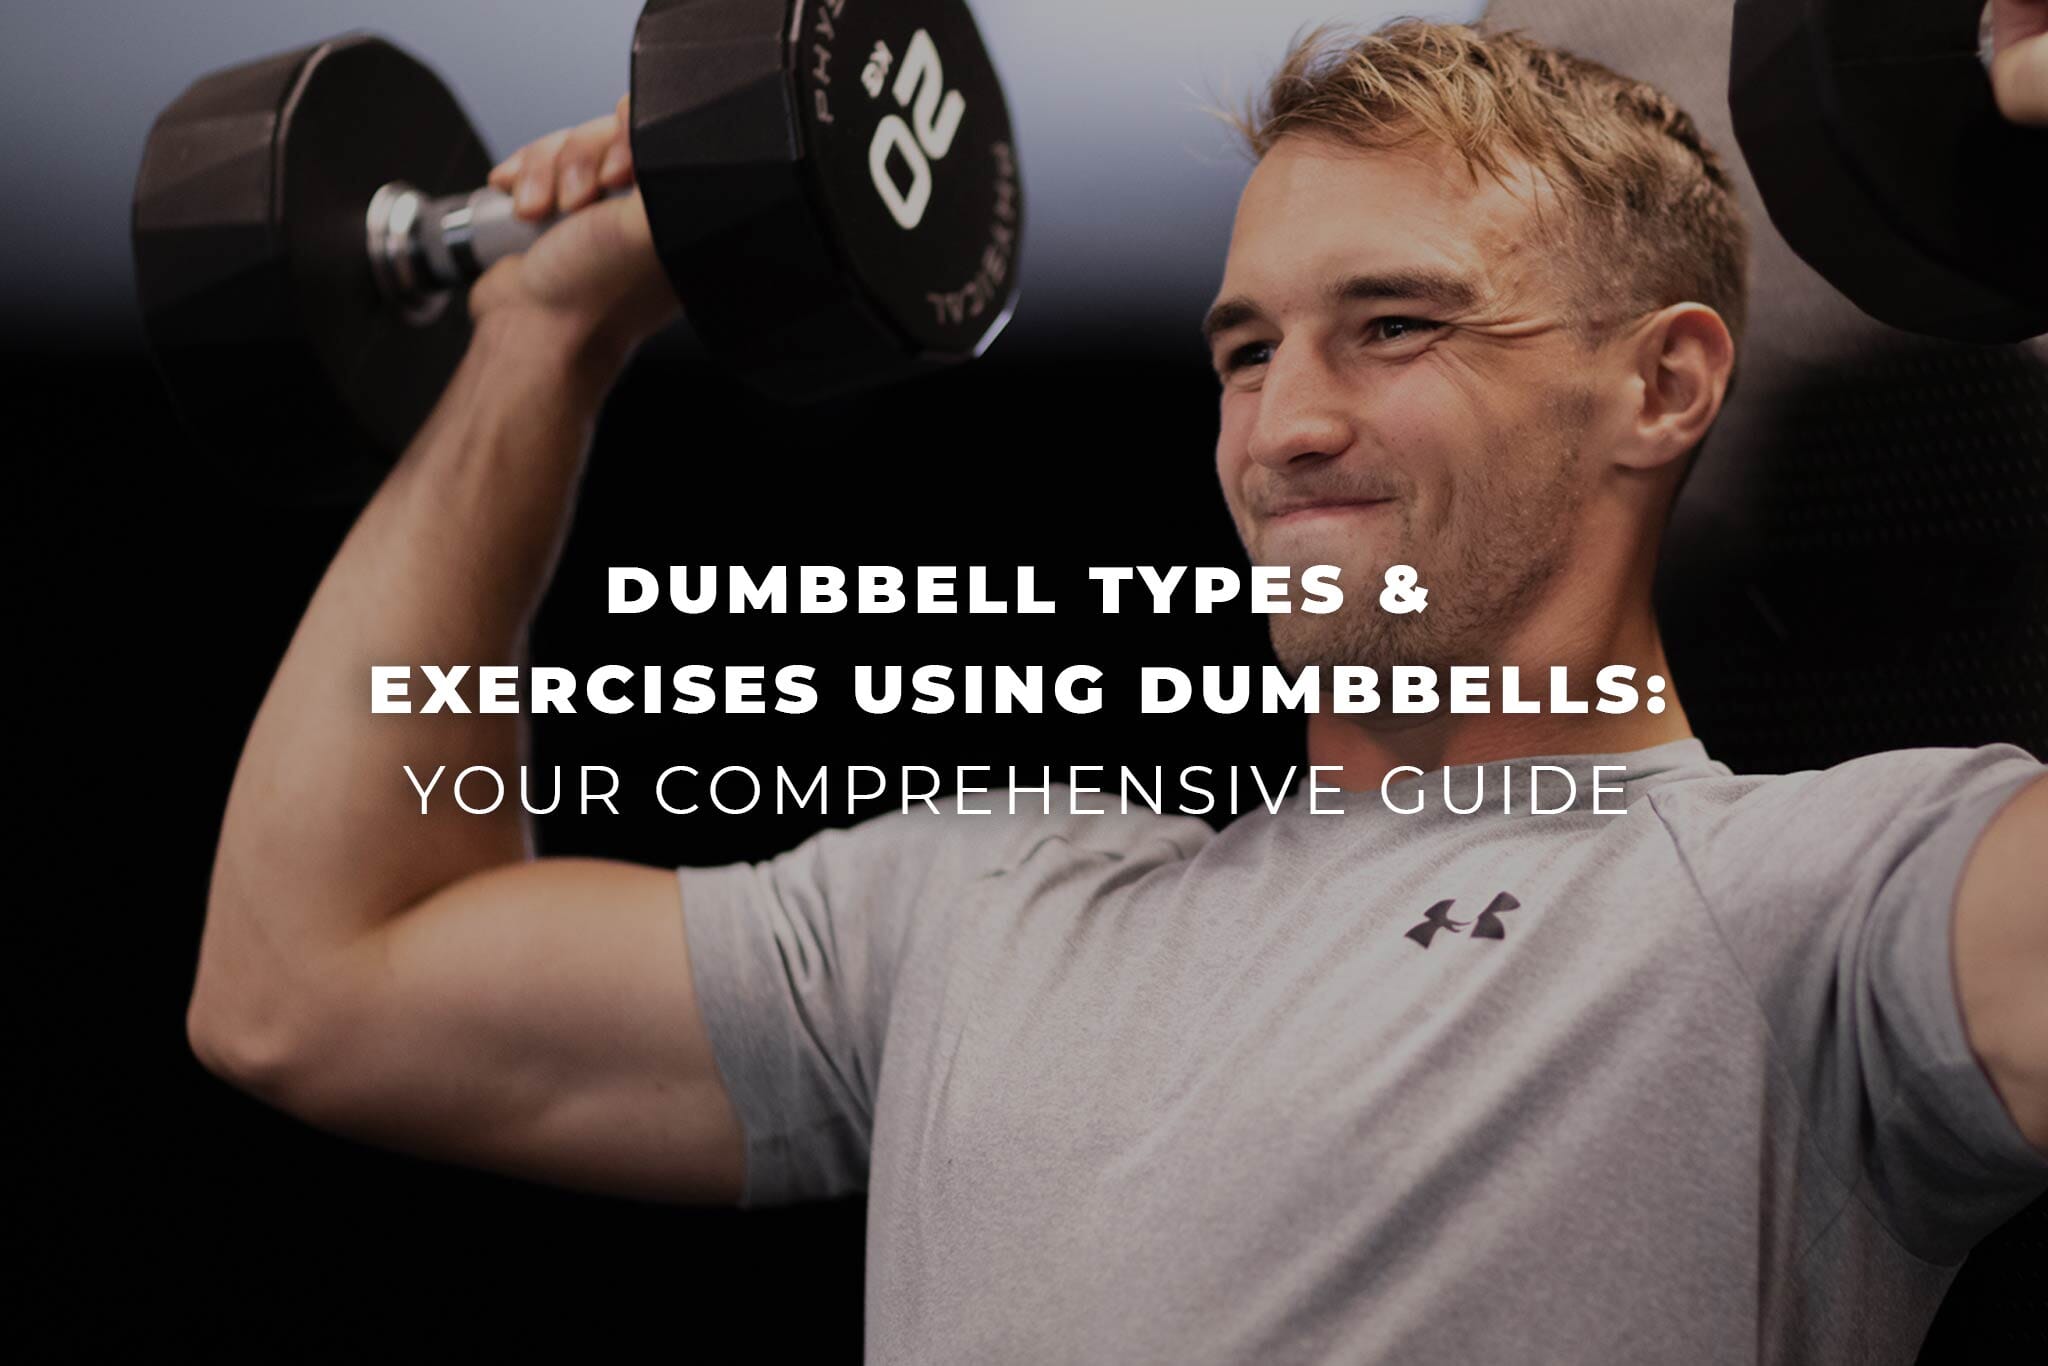 A comprehensive guide on the different types of dumbbells & exercises using  them by Physical